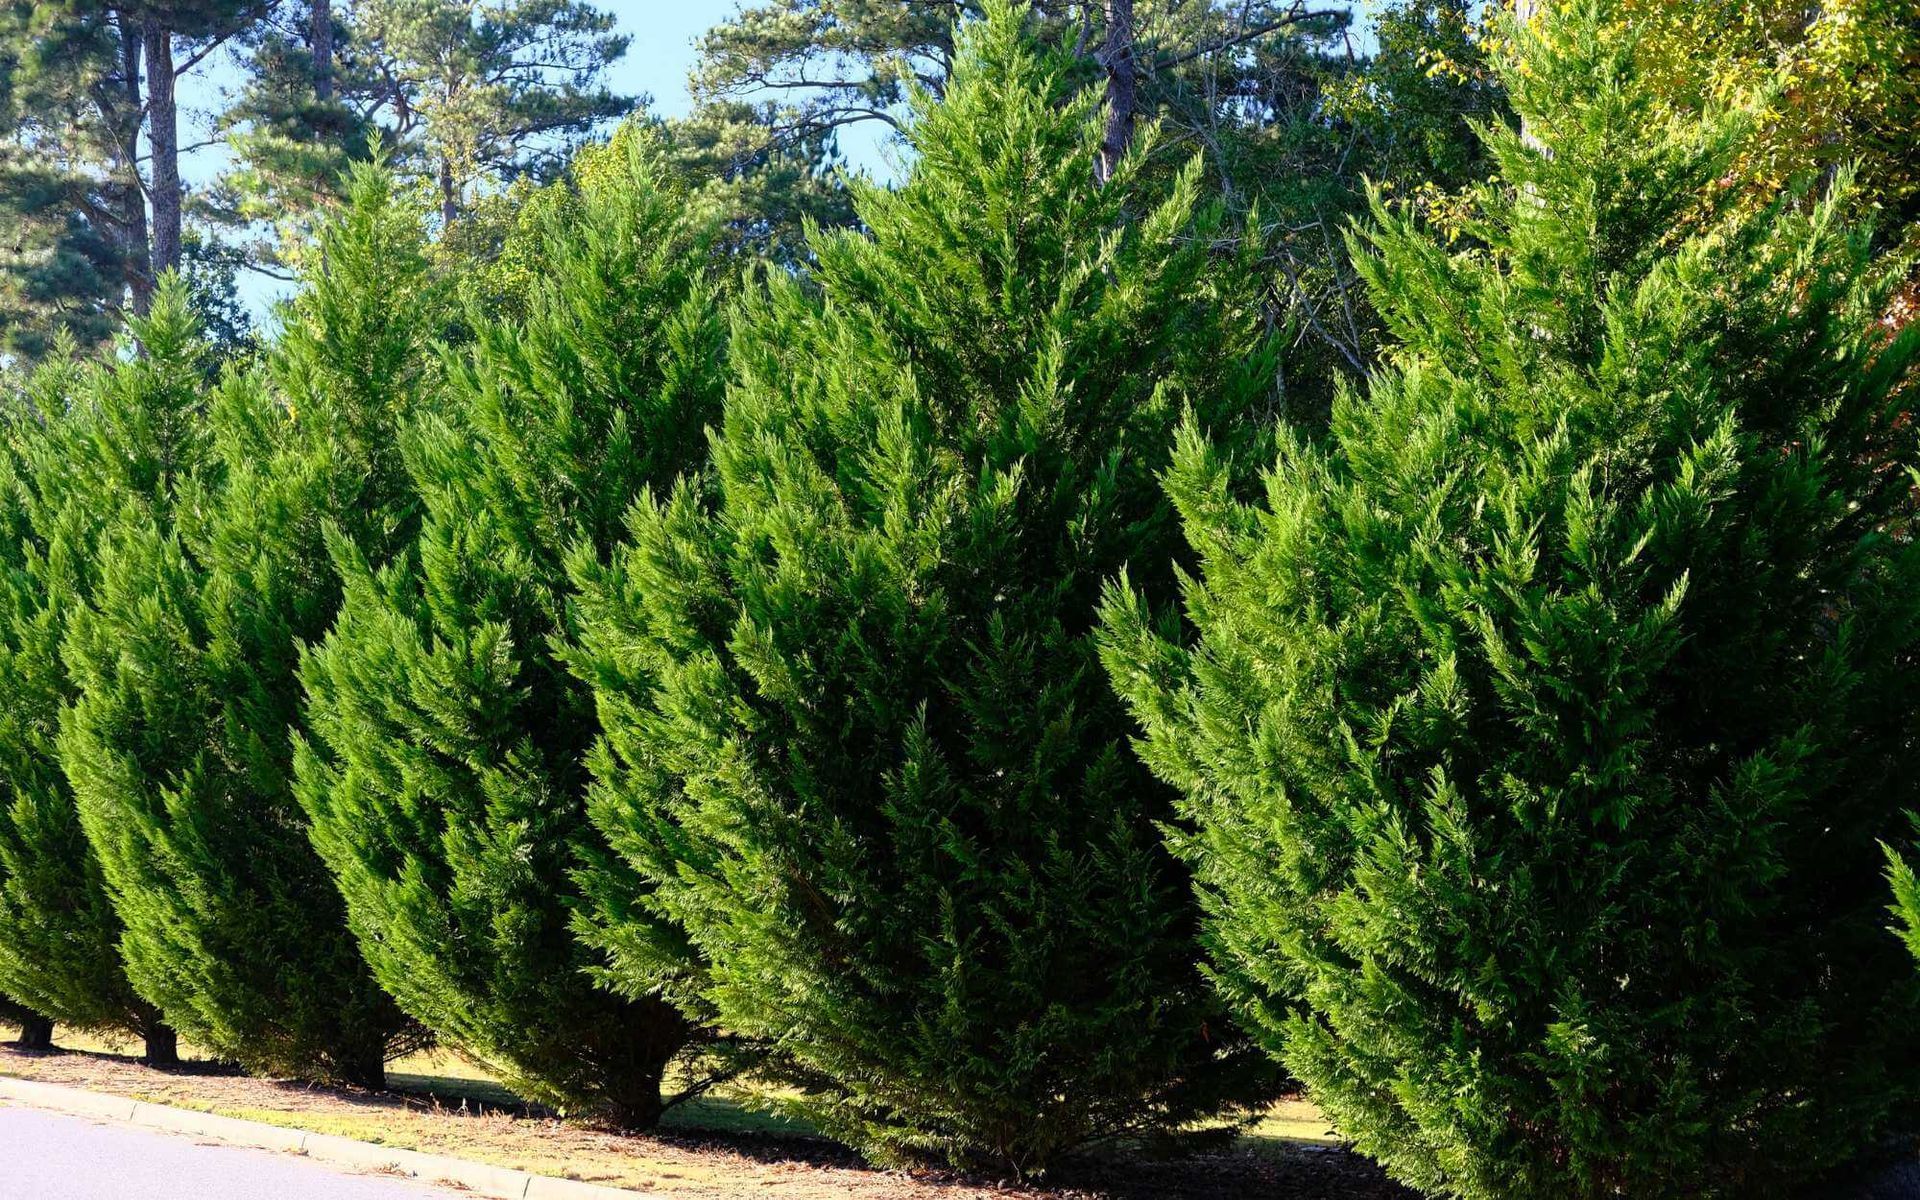 plant growth regulators are applied to these cypress trees to manage their health and growth